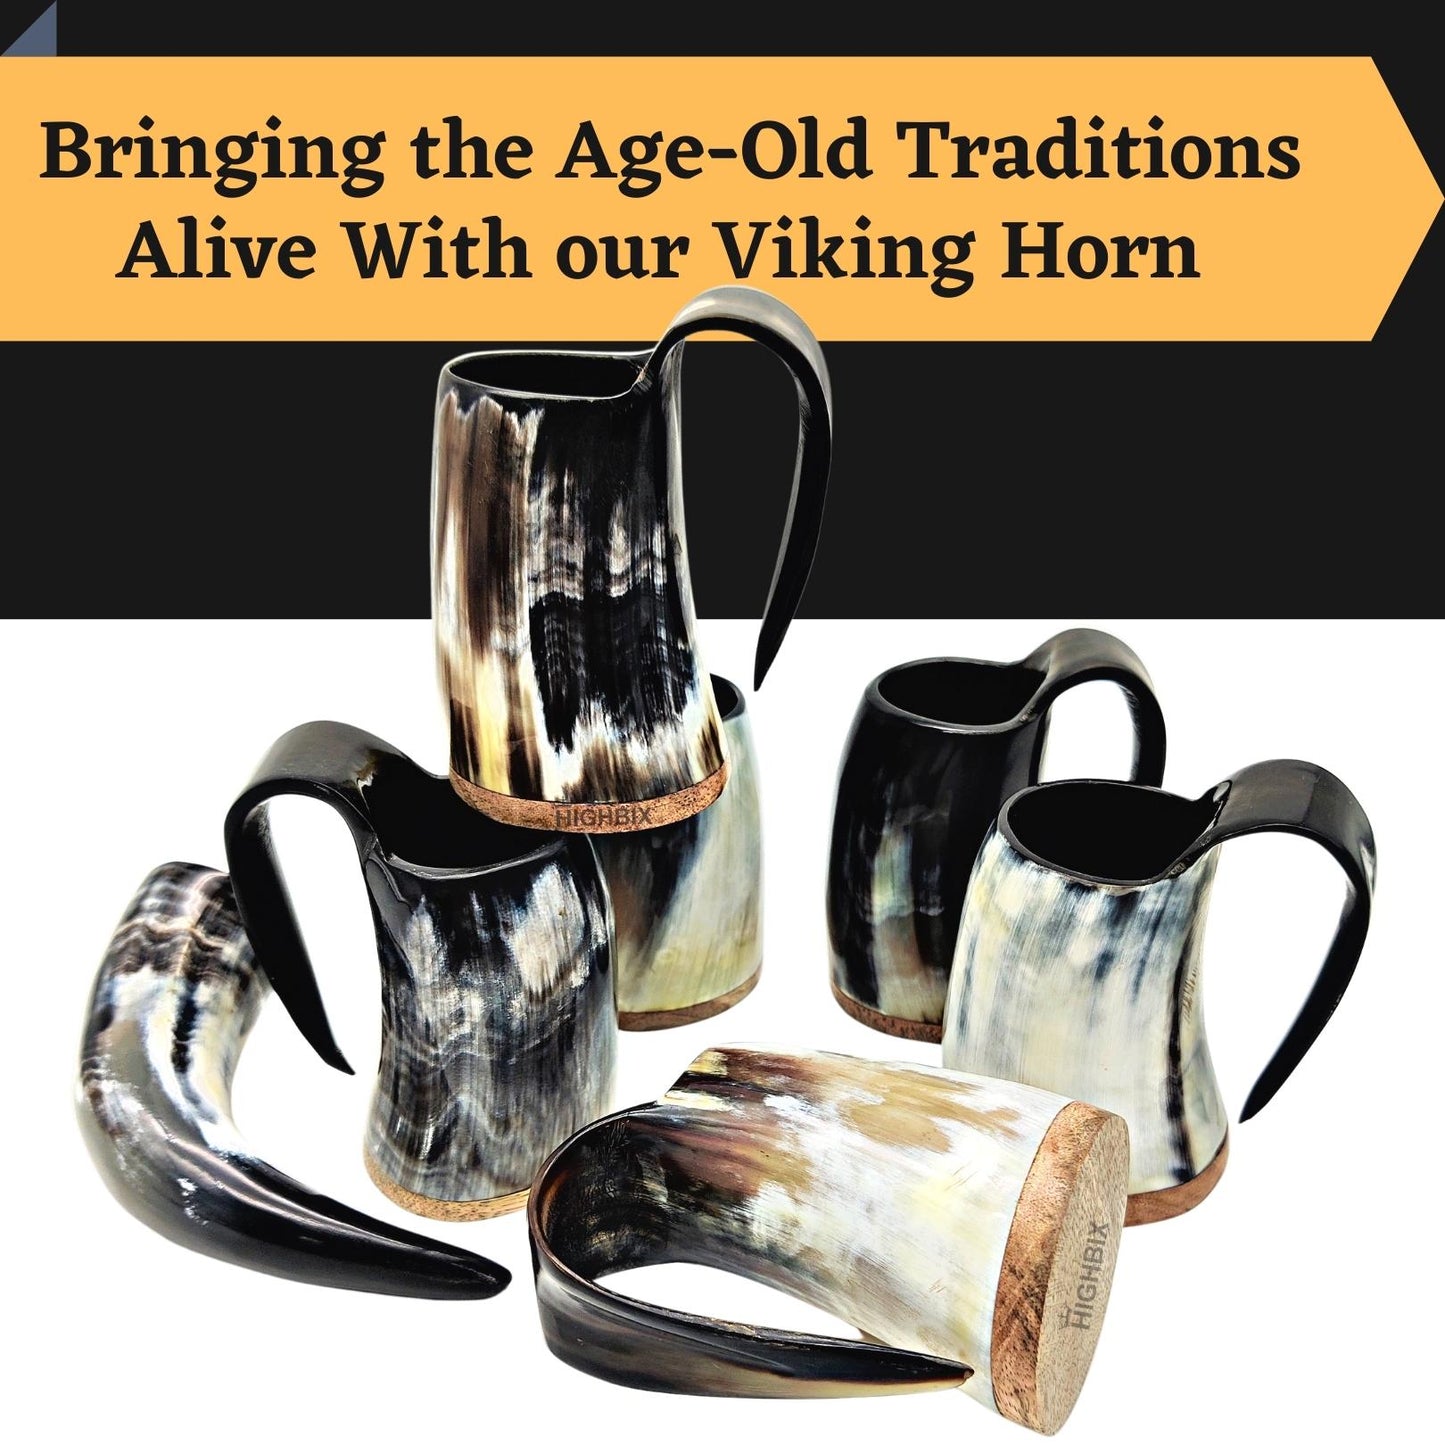 Authentic Vikings Drinking Horn Shot Cup